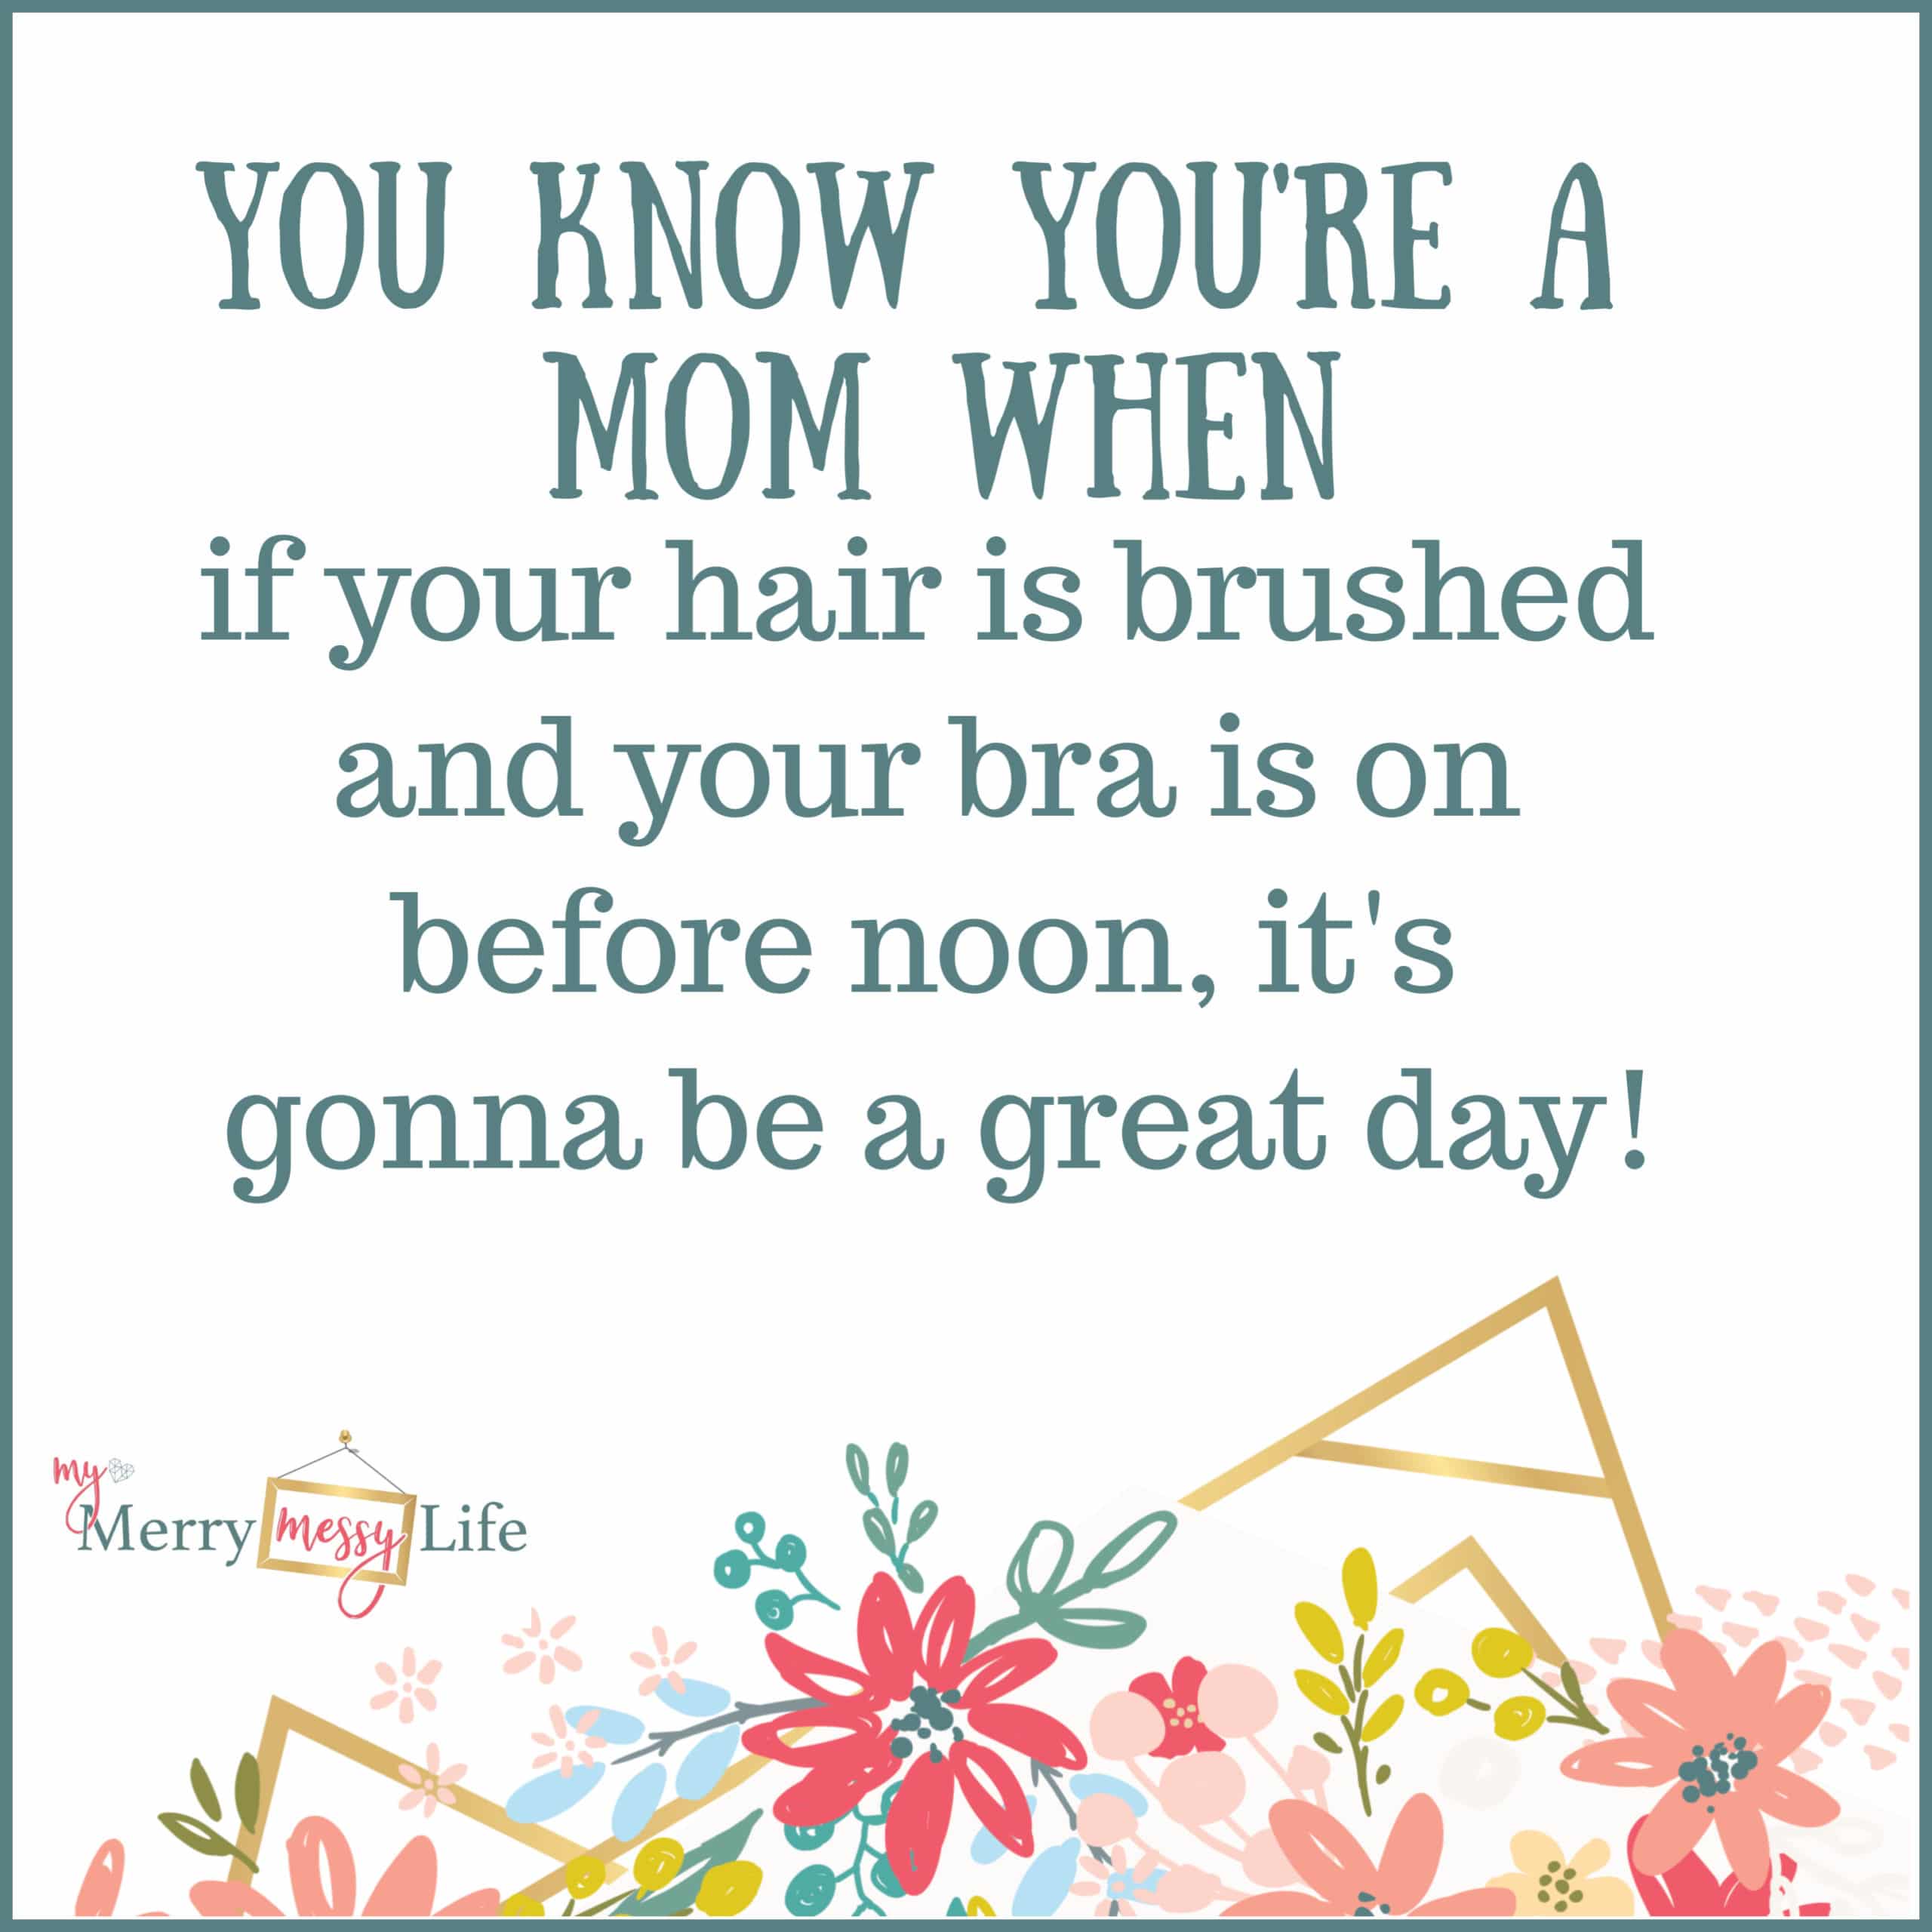 You know you're a mom when your if your hair is brushed and your bra is on before noon, it's gonna be a good day. - Funny Mom Memes about #babylife